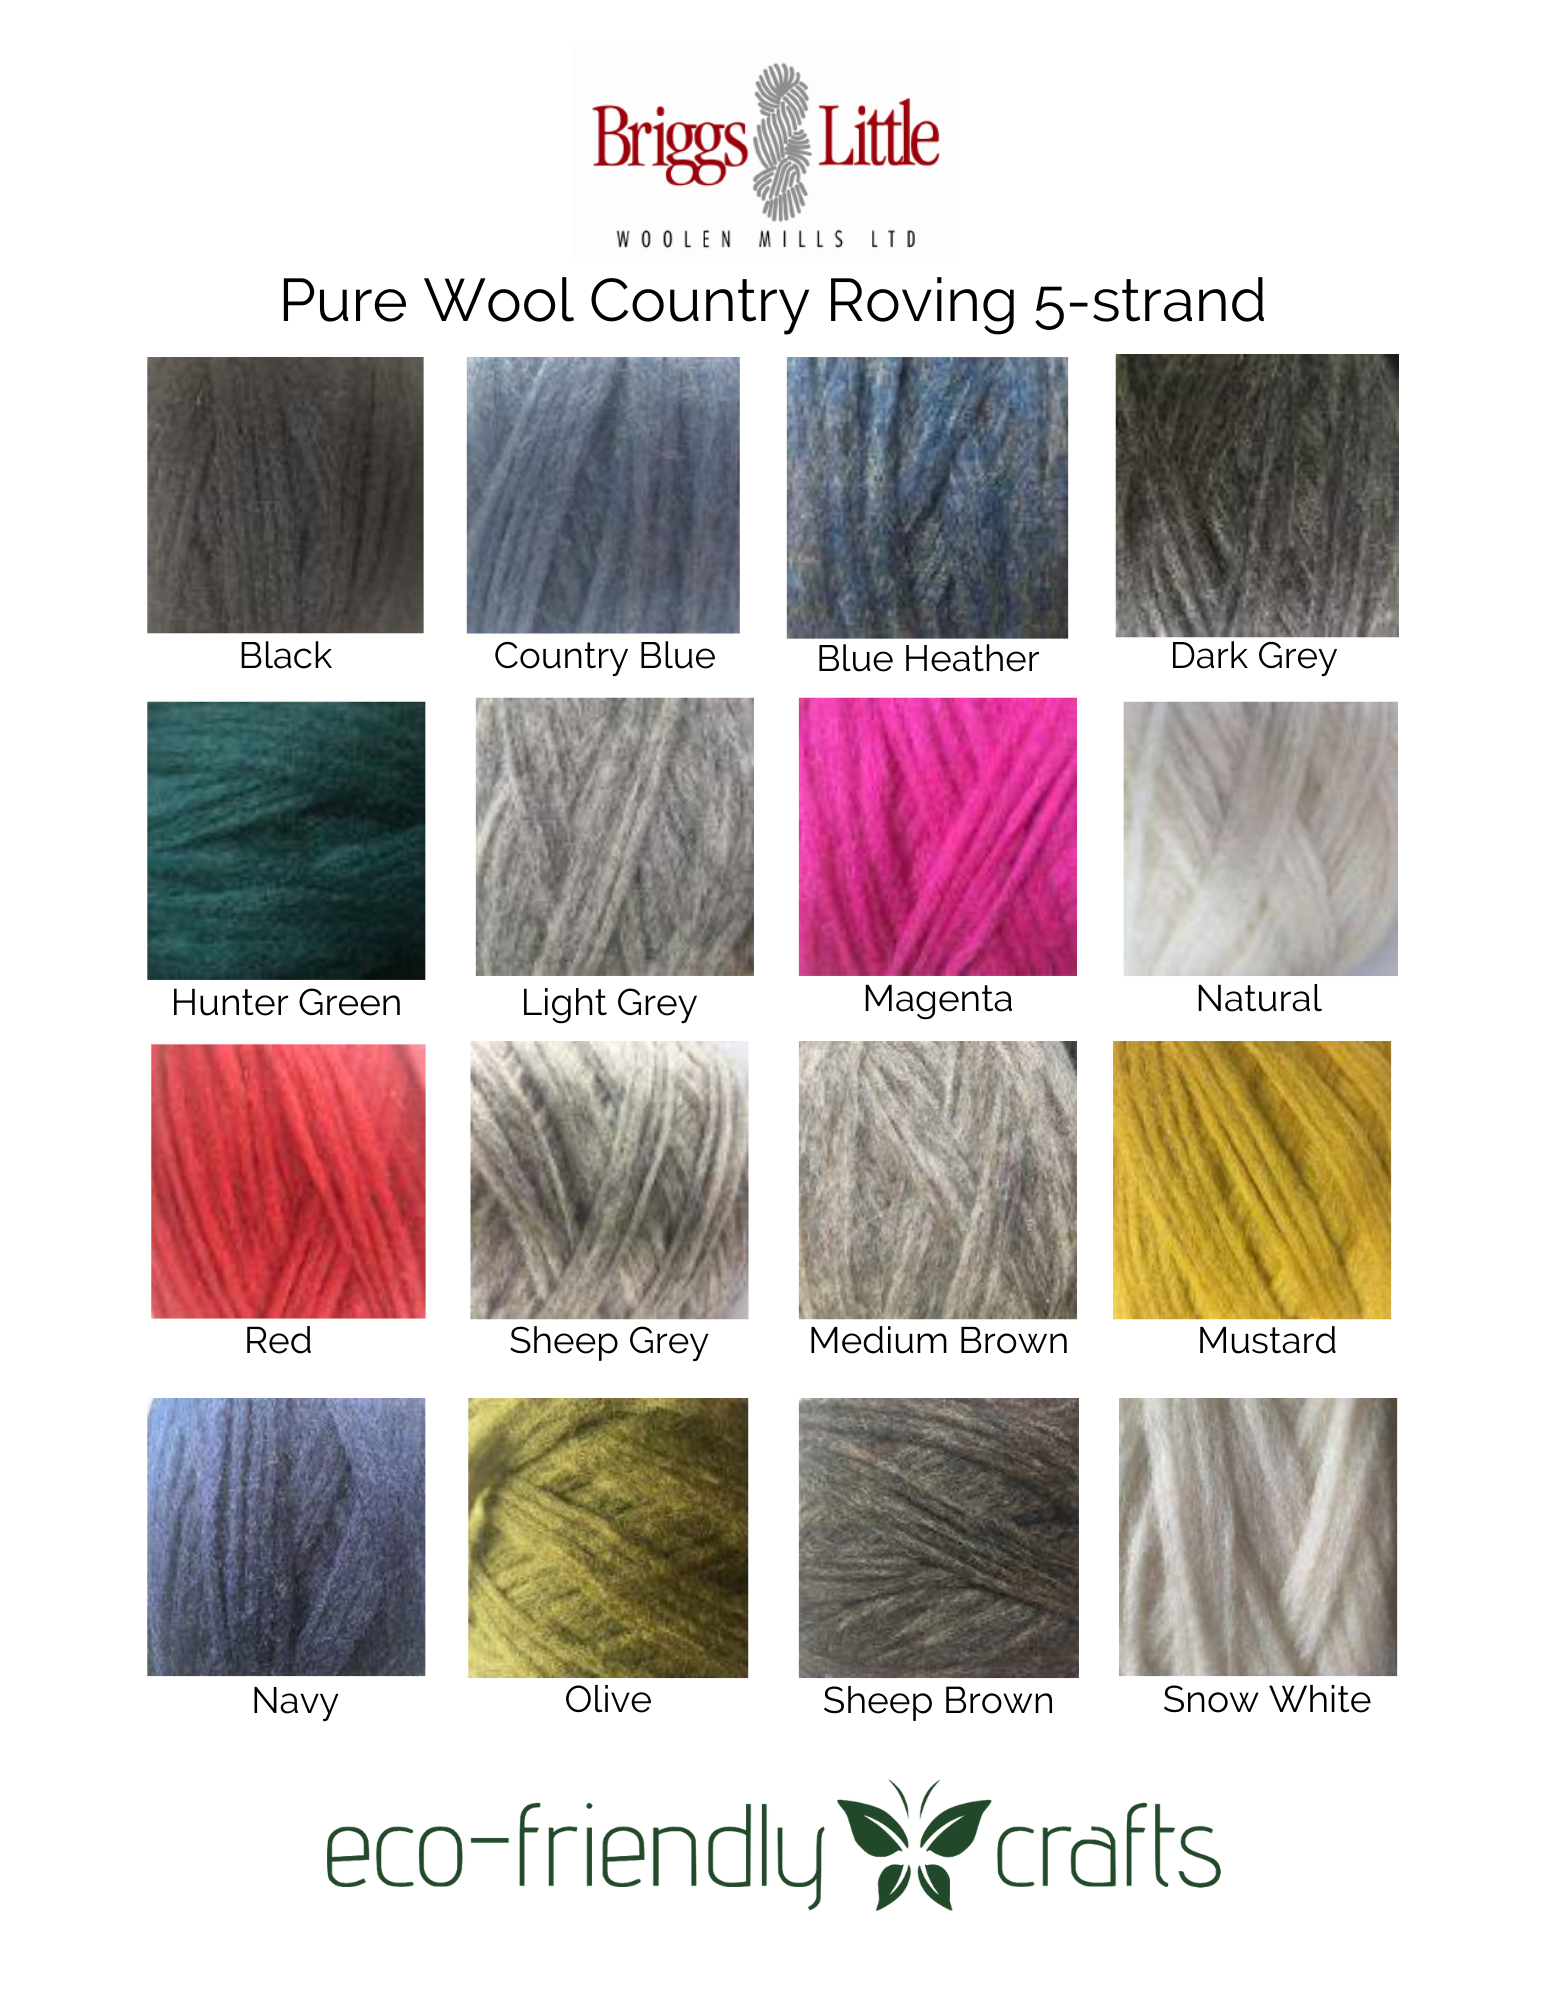 Briggs and Little Pure Wool Country Roving - 8 oz - For Knitting, Felting, and Oxford Punch Needle